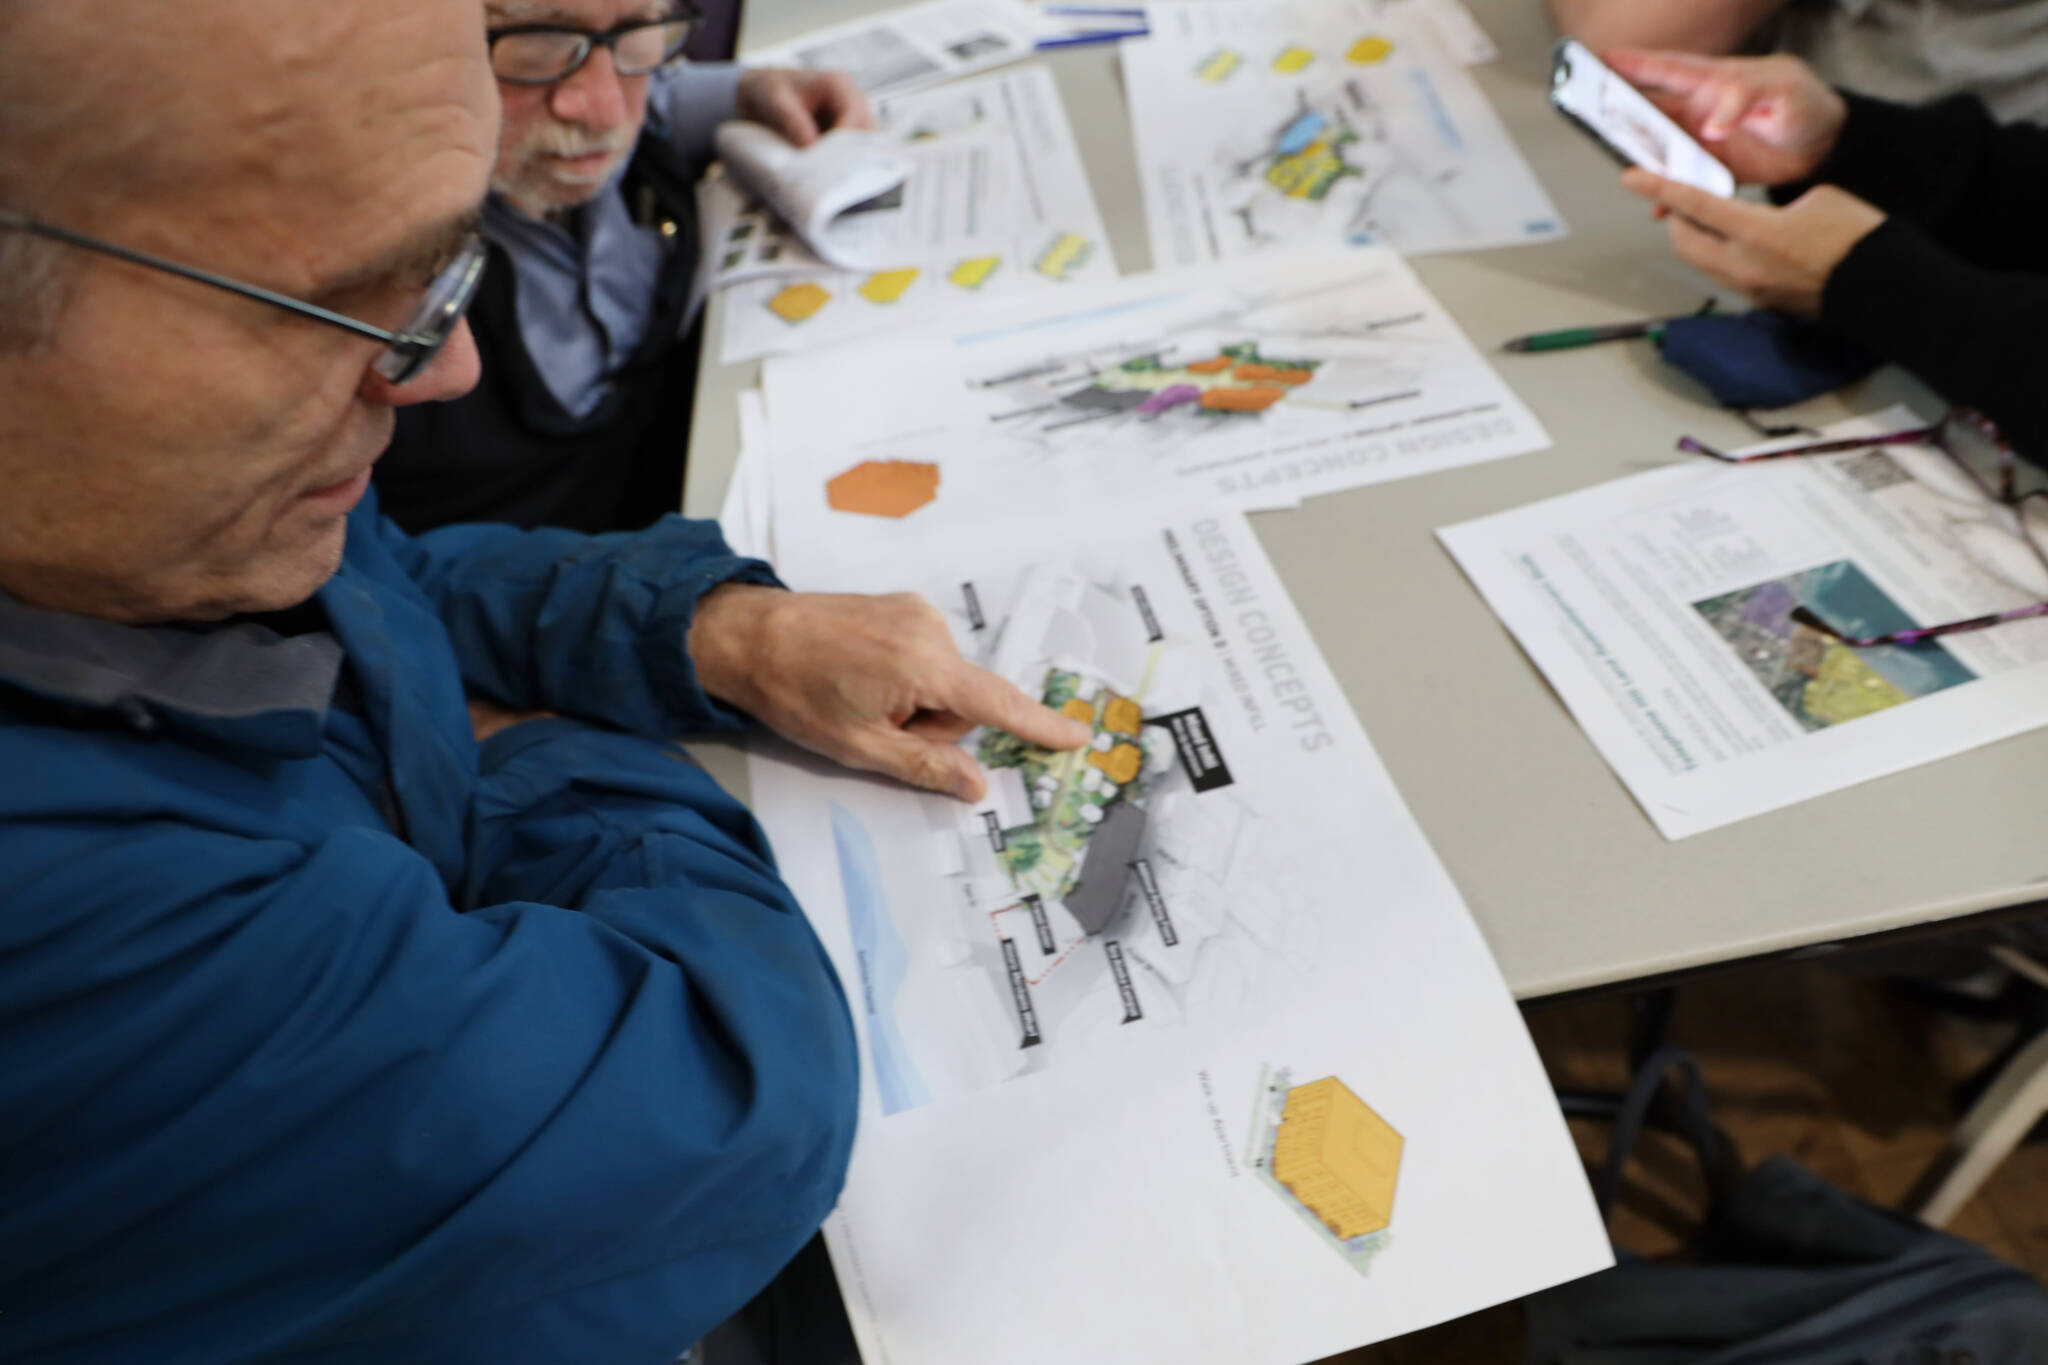 Tony Tengs points to his previous home while looking at the new design concepts for the Telephone Hill redevelopment project that were presented Wednesday evening at the Juneau Arts and Culture Center. (Clarise Larson / Juneau Empire)